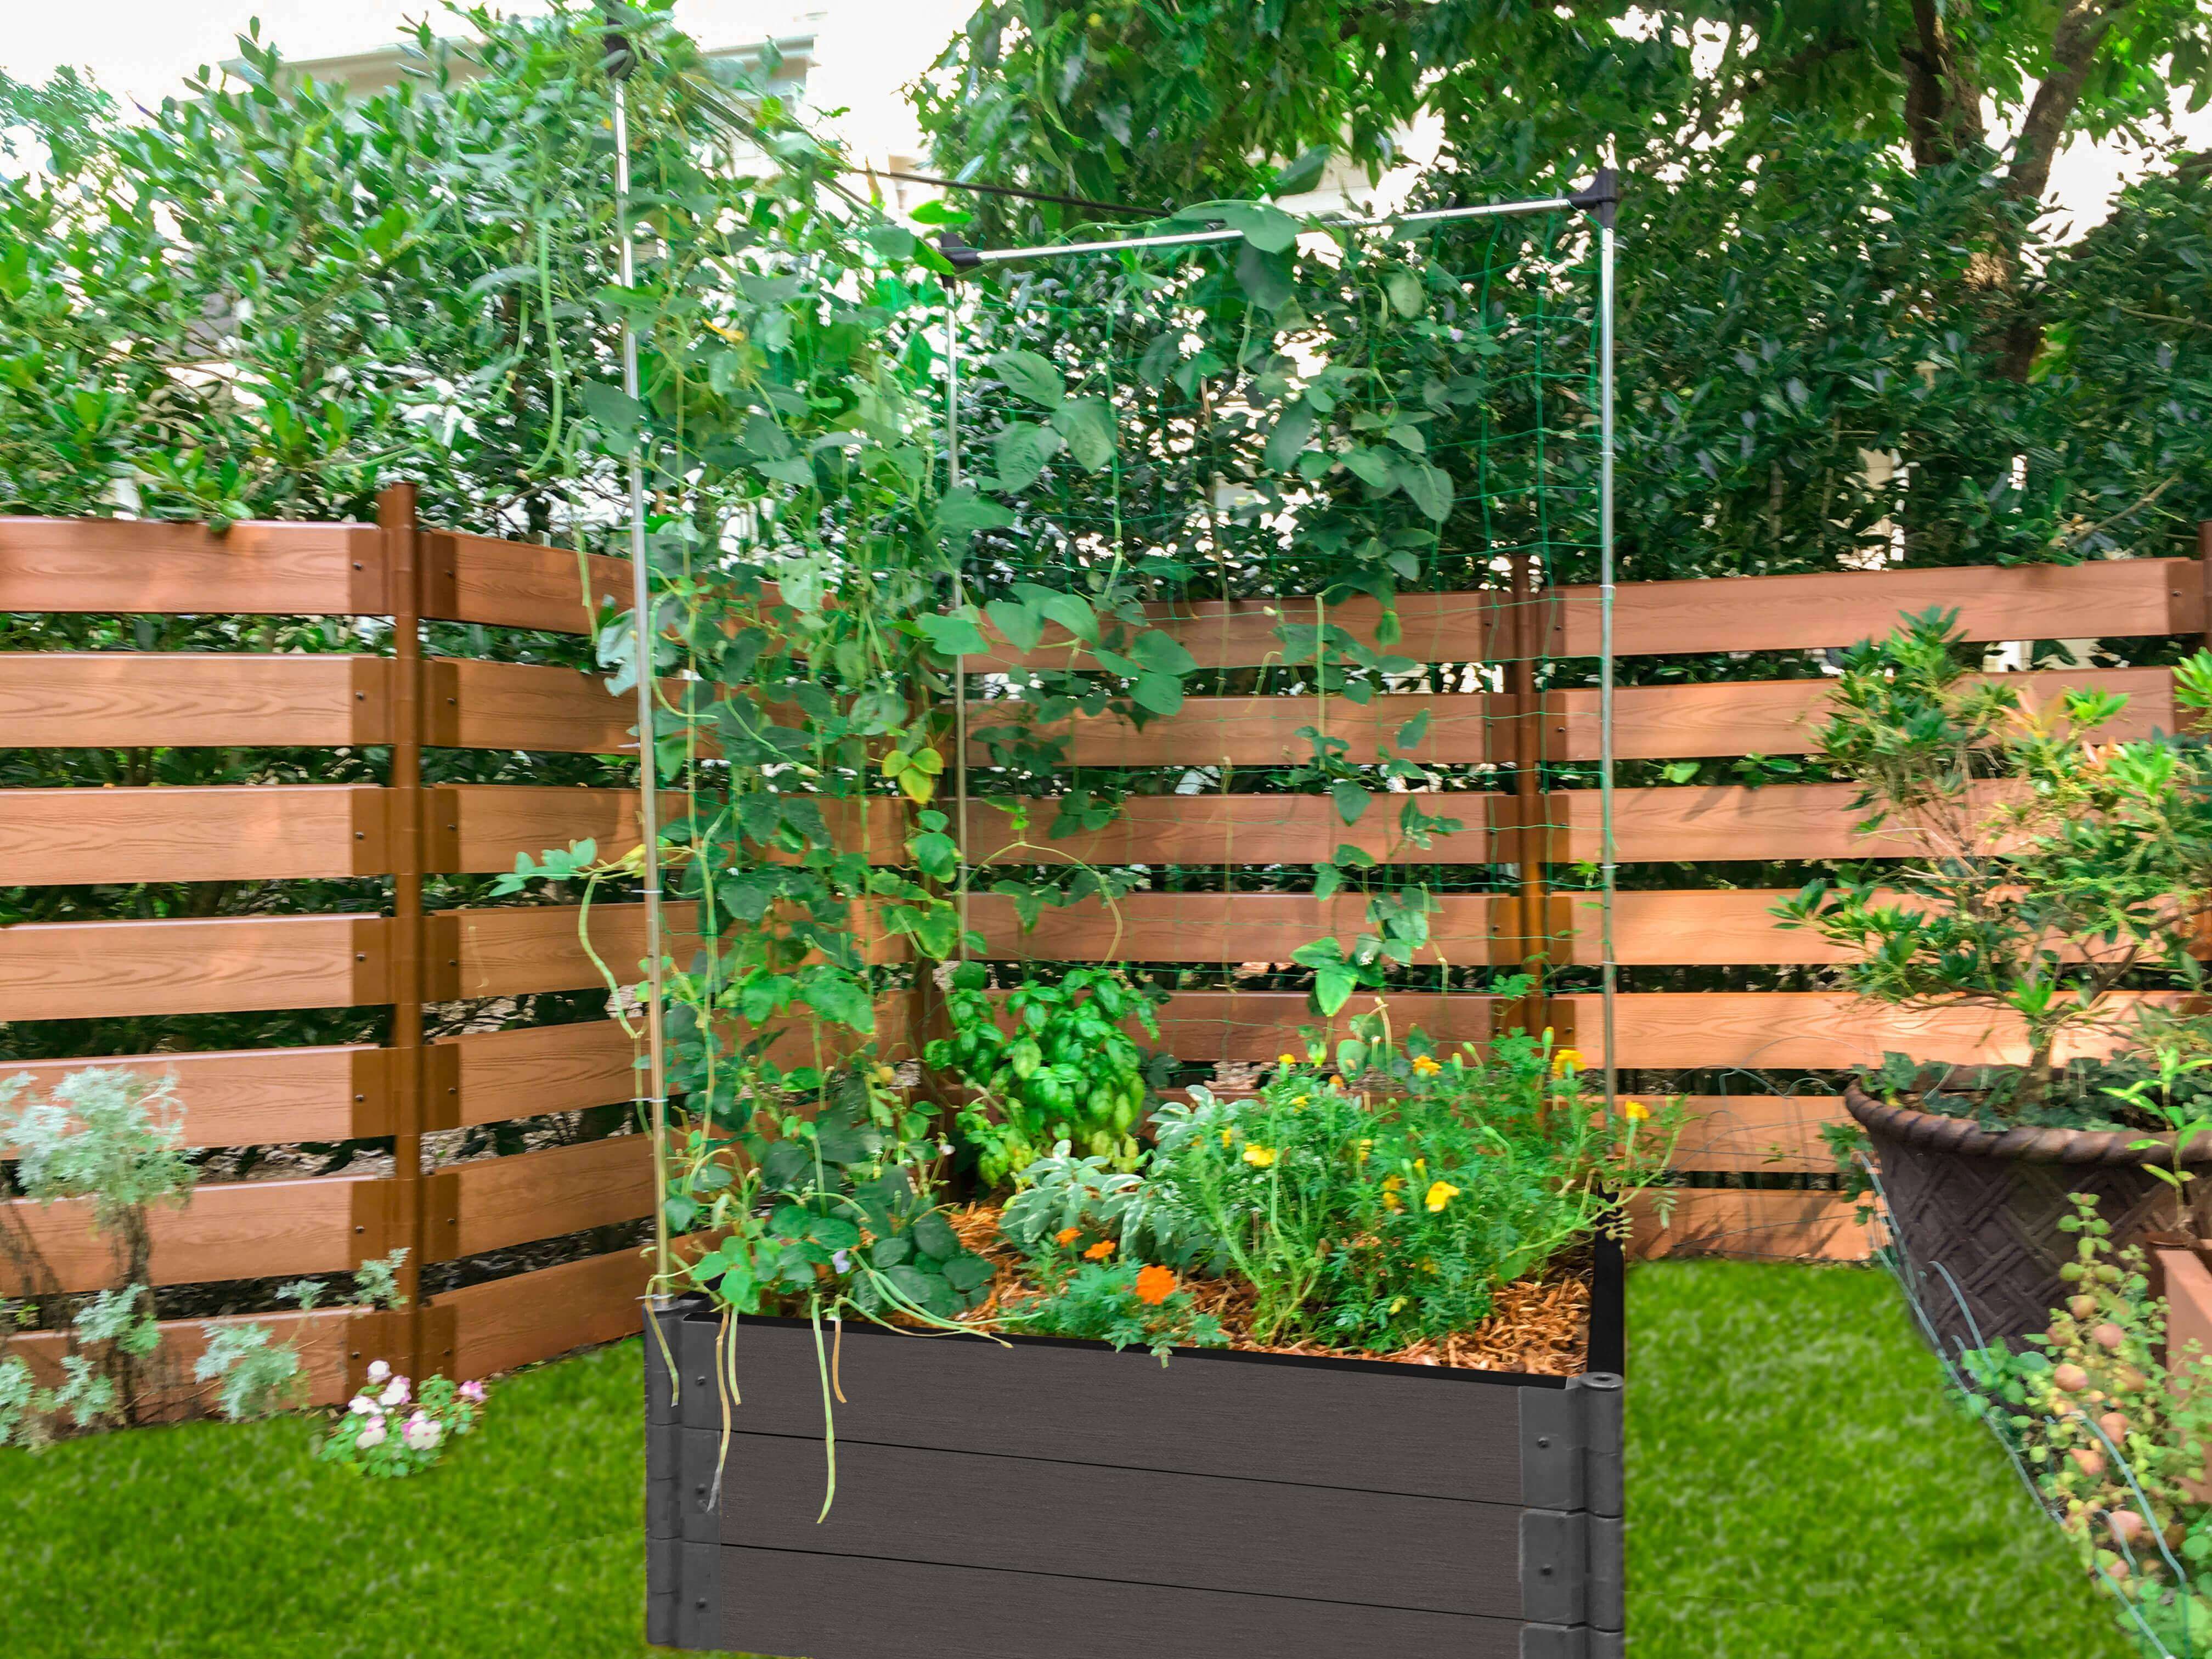 4' x 4' Raised Garden Bed with Trellis Raised Garden Beds Frame It All Weathered Wood 2